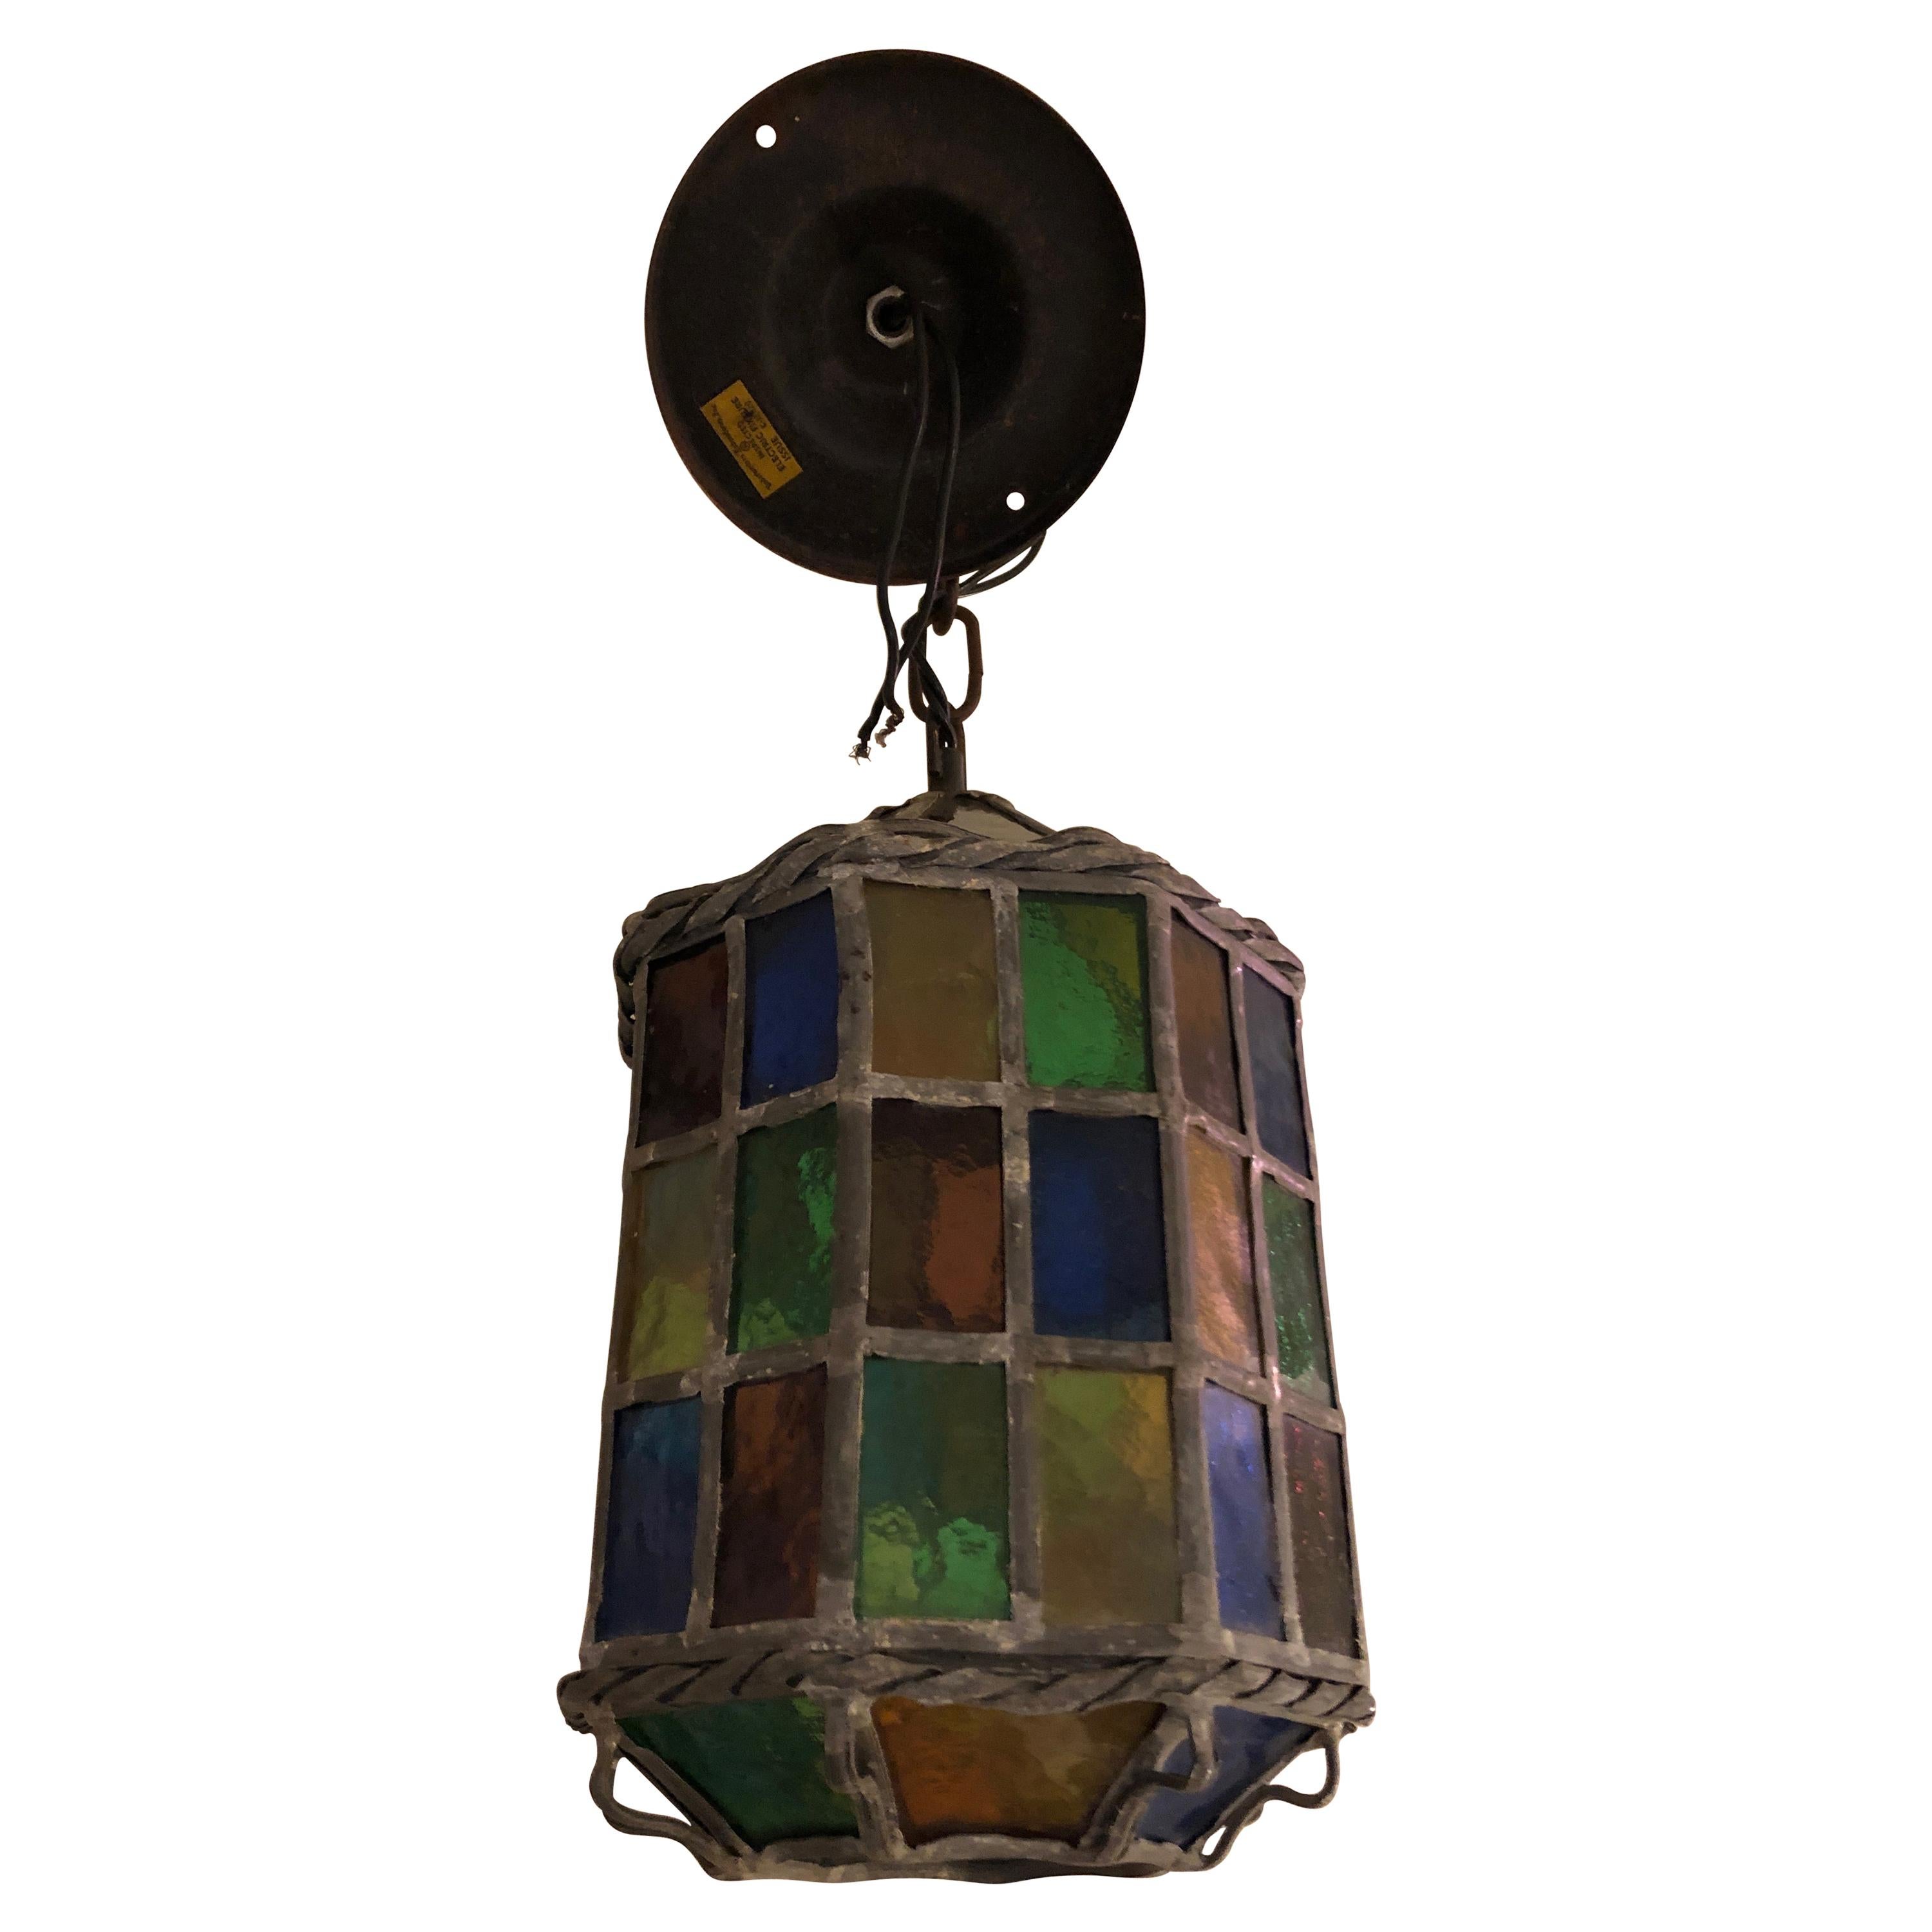 Magical Stained Glass Lantern Shaped Pendant Chandelier